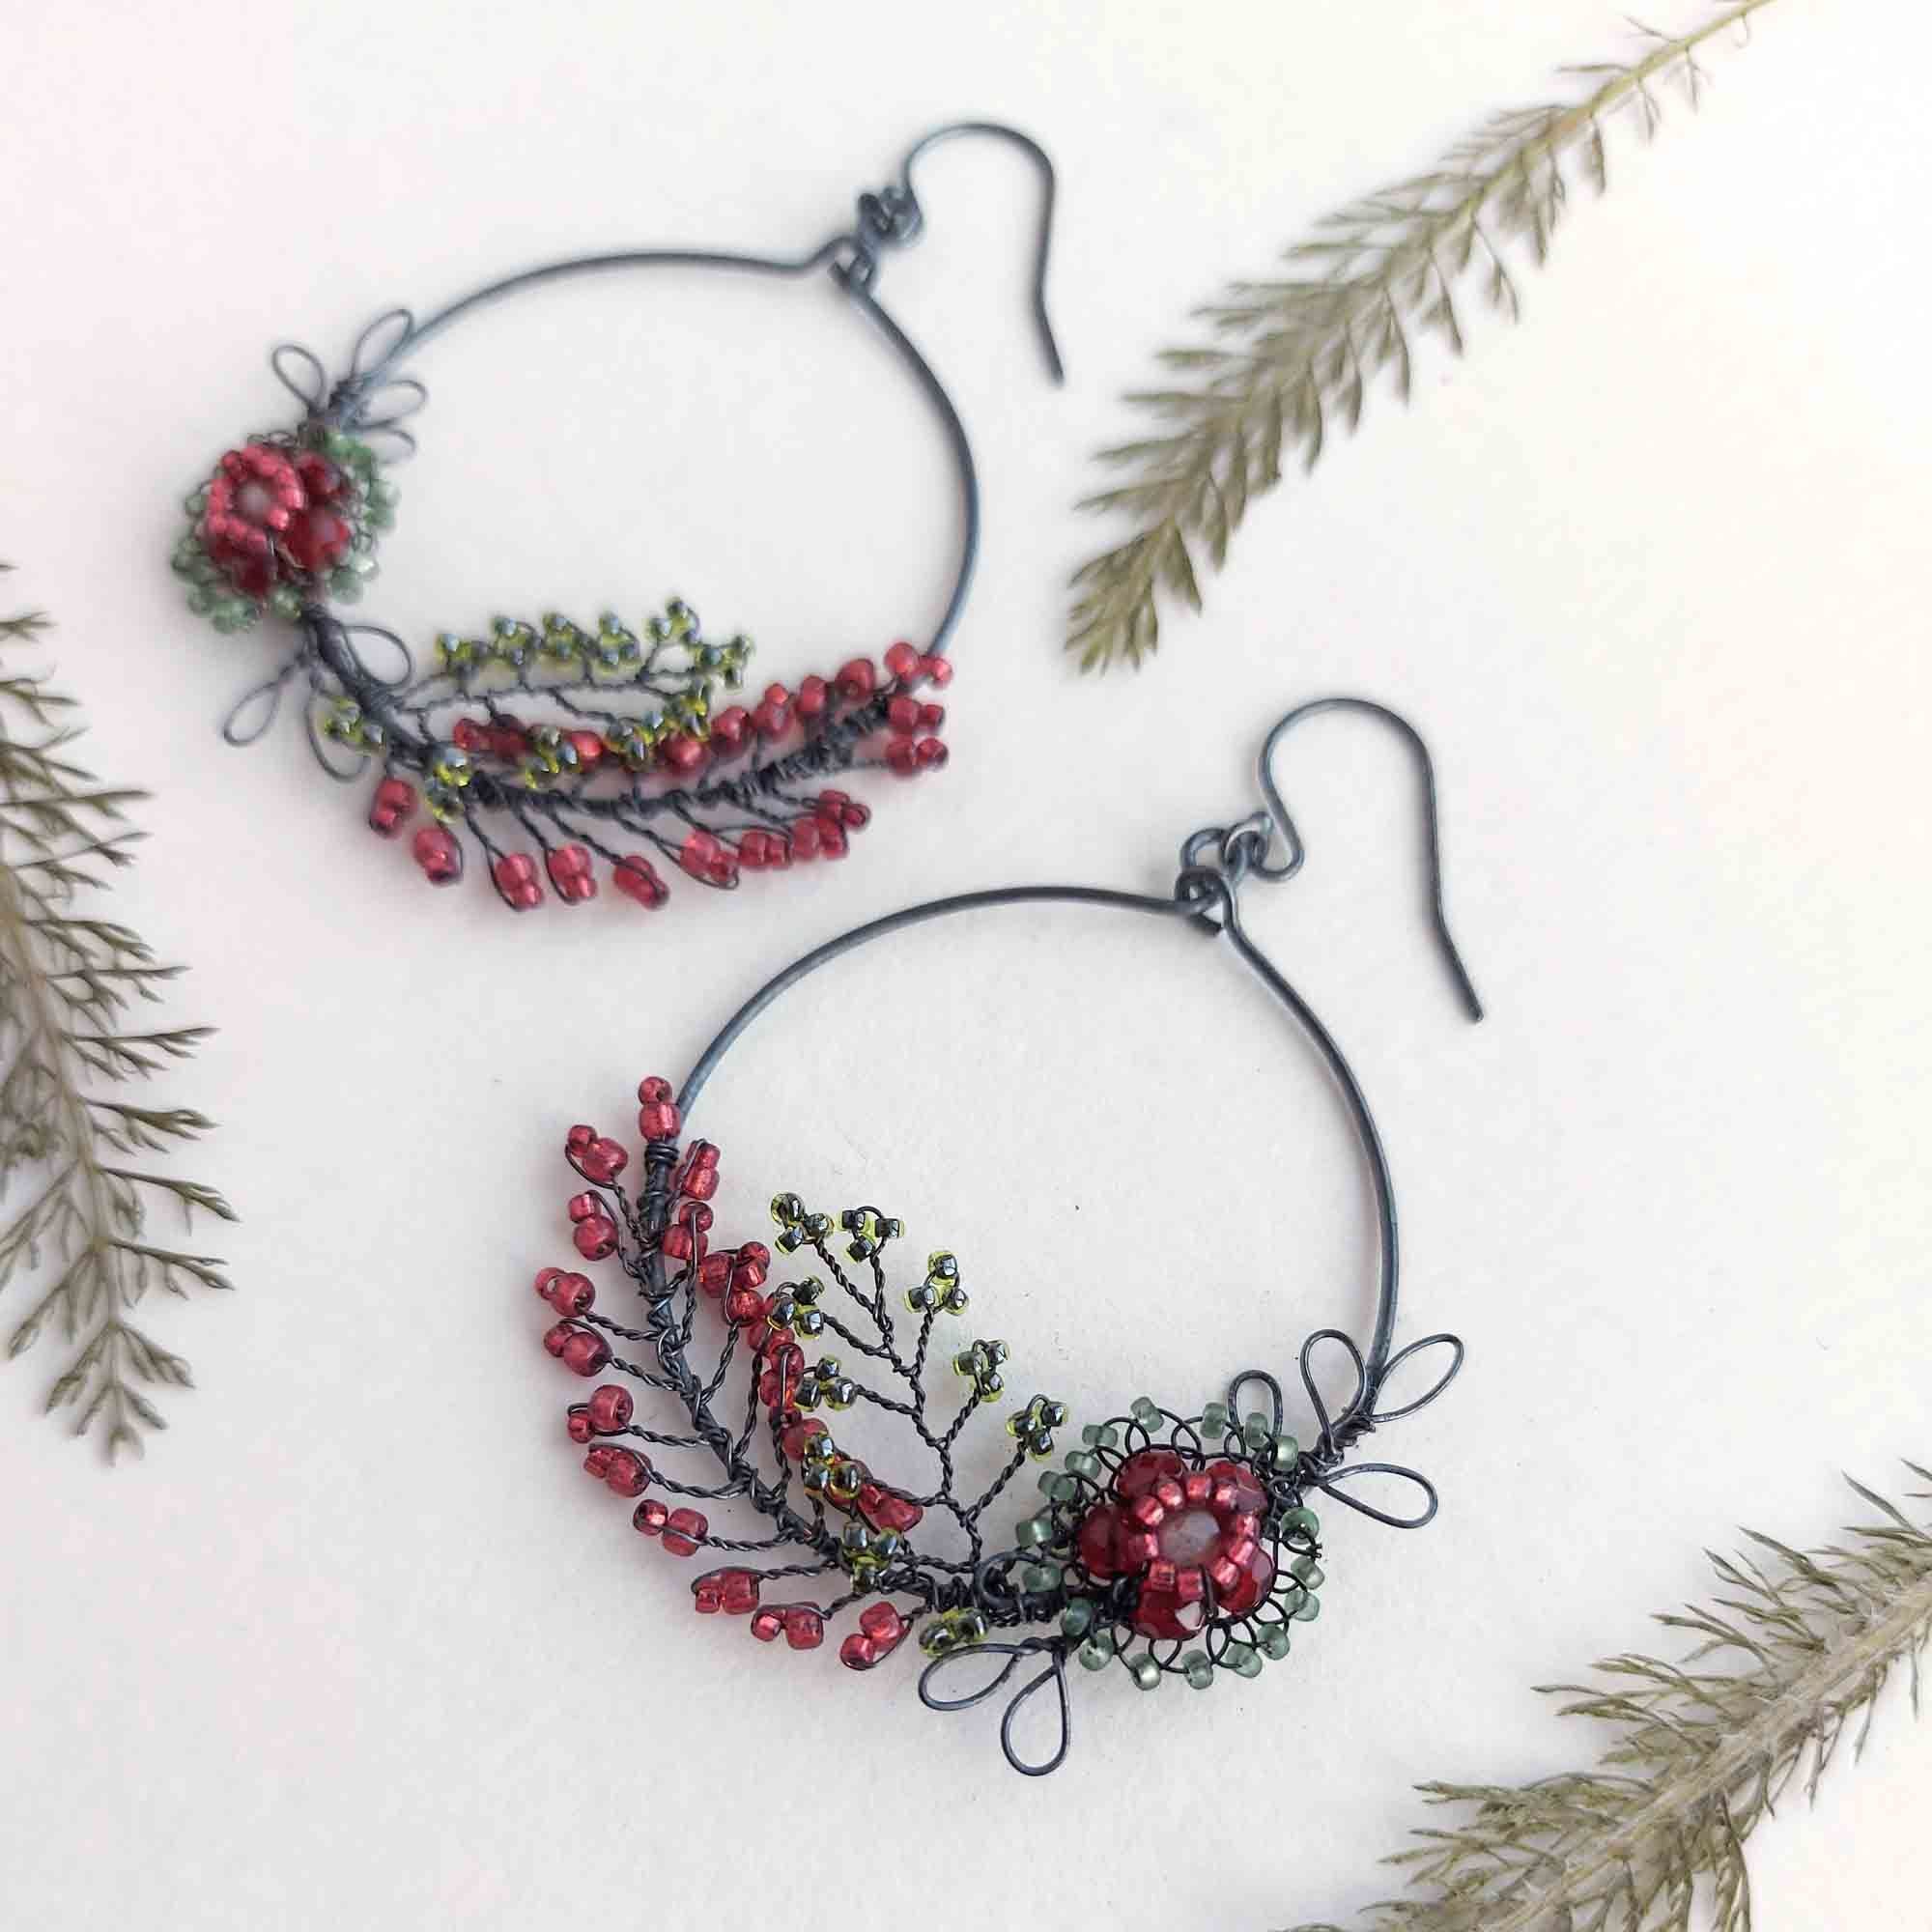 Foliage jewellery collection by Judith Brown